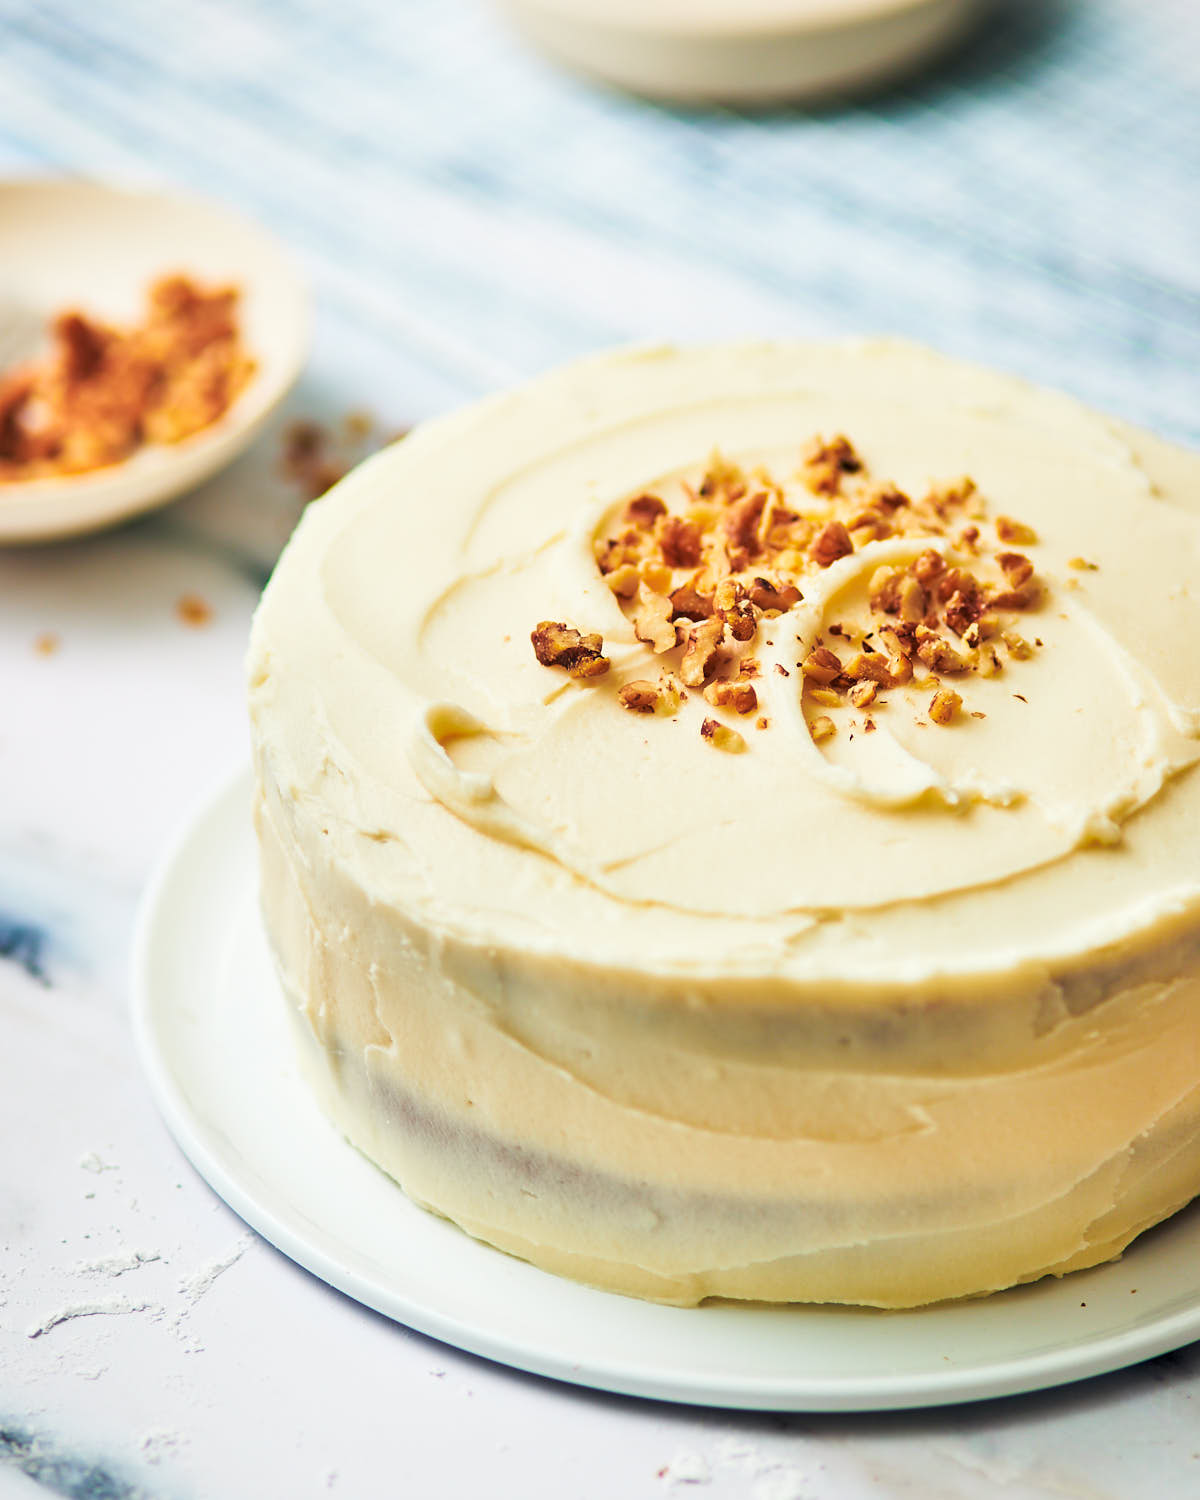 Banana walnut cake decorated with cream cheese frosting and chopped nuts.